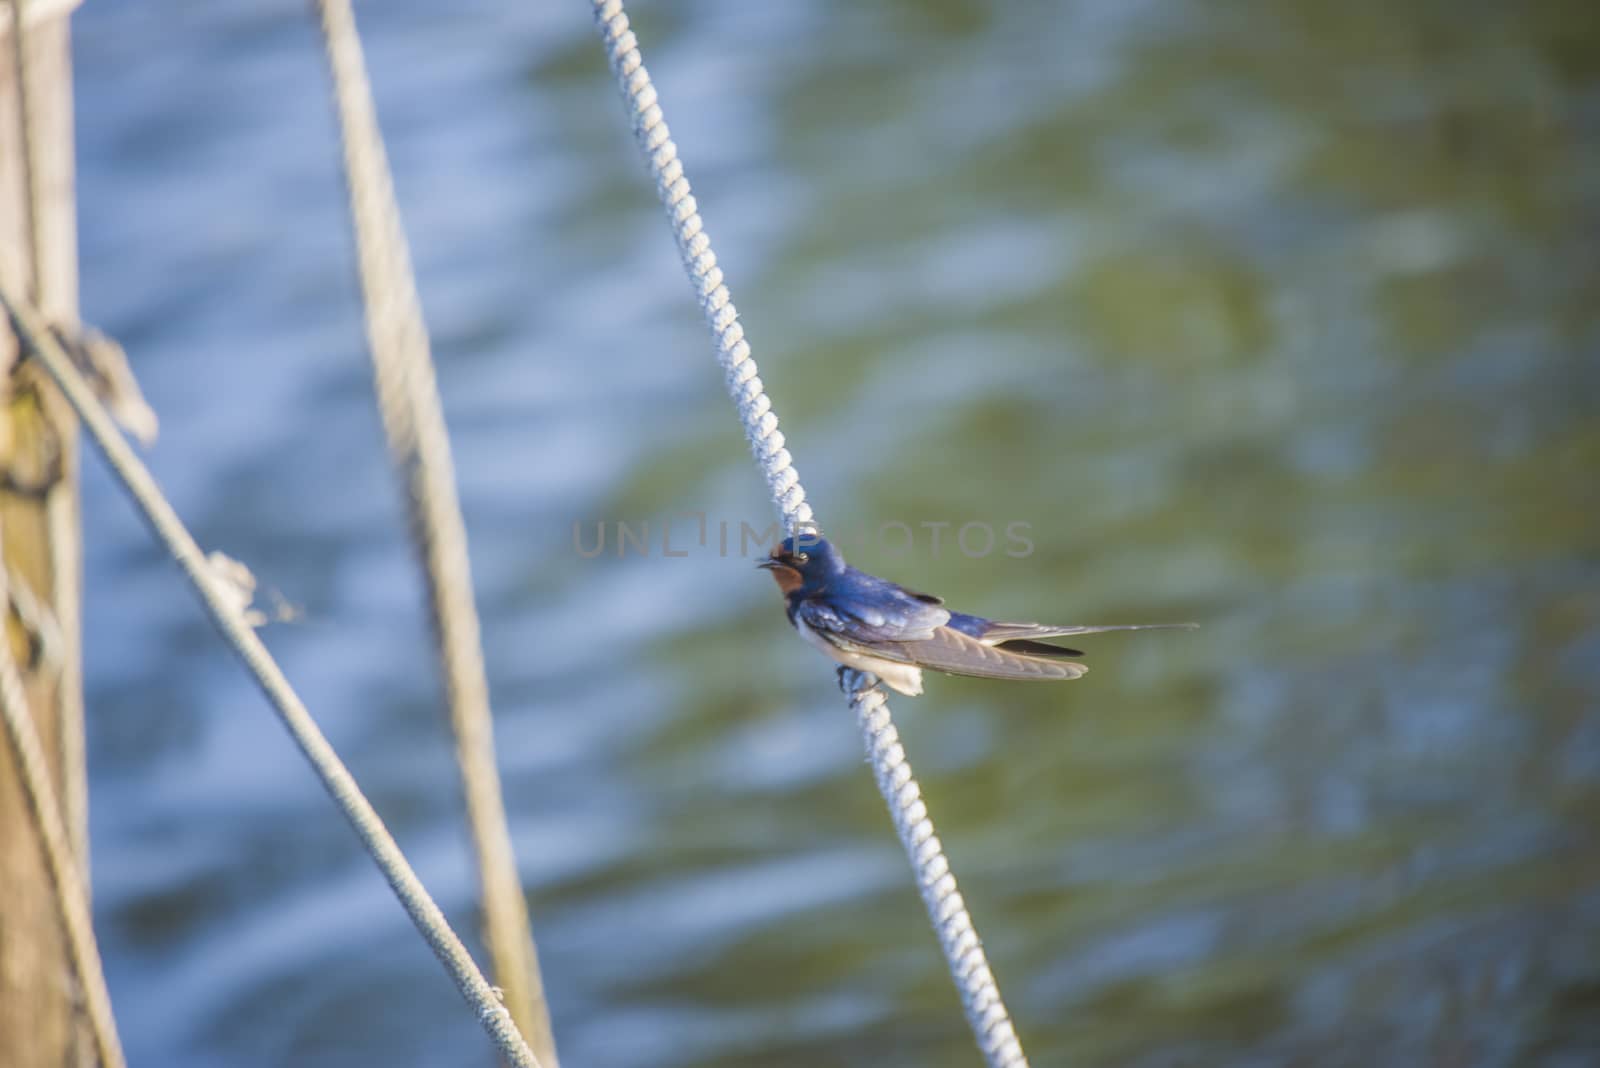 The picture of Barn Swallow, Hirundo rustica is shot by the Tista River in Halden, Norway.